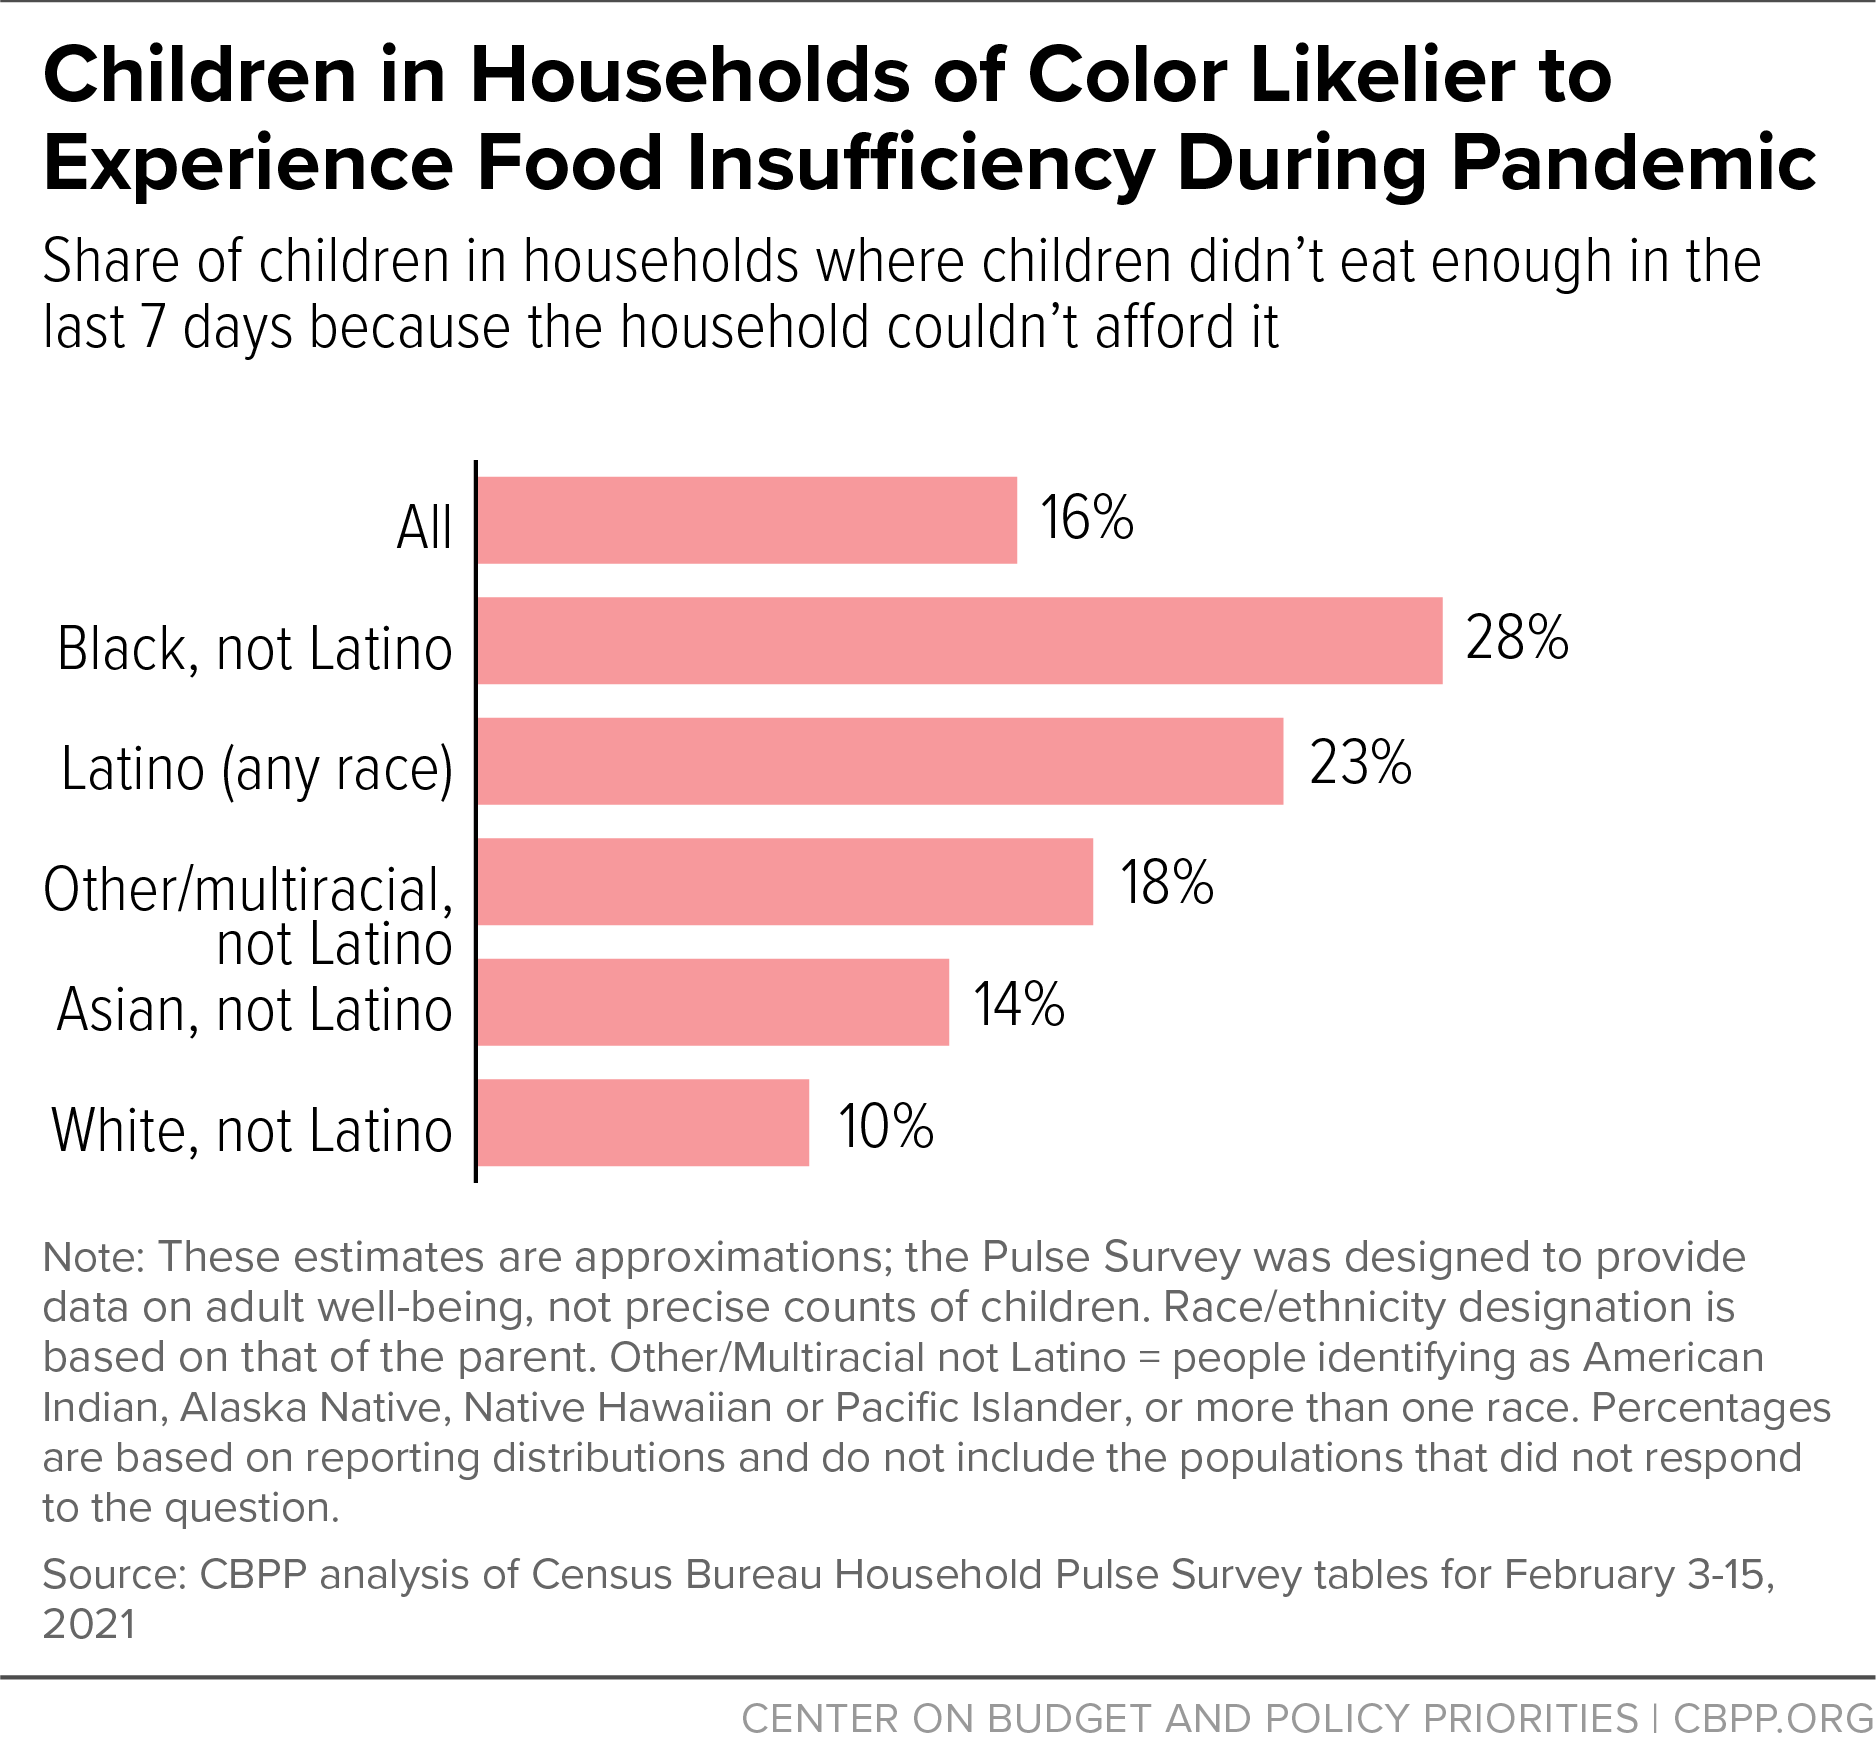 Children in Households of Color Likelier to Experience Food Insufficiency During Pandemic